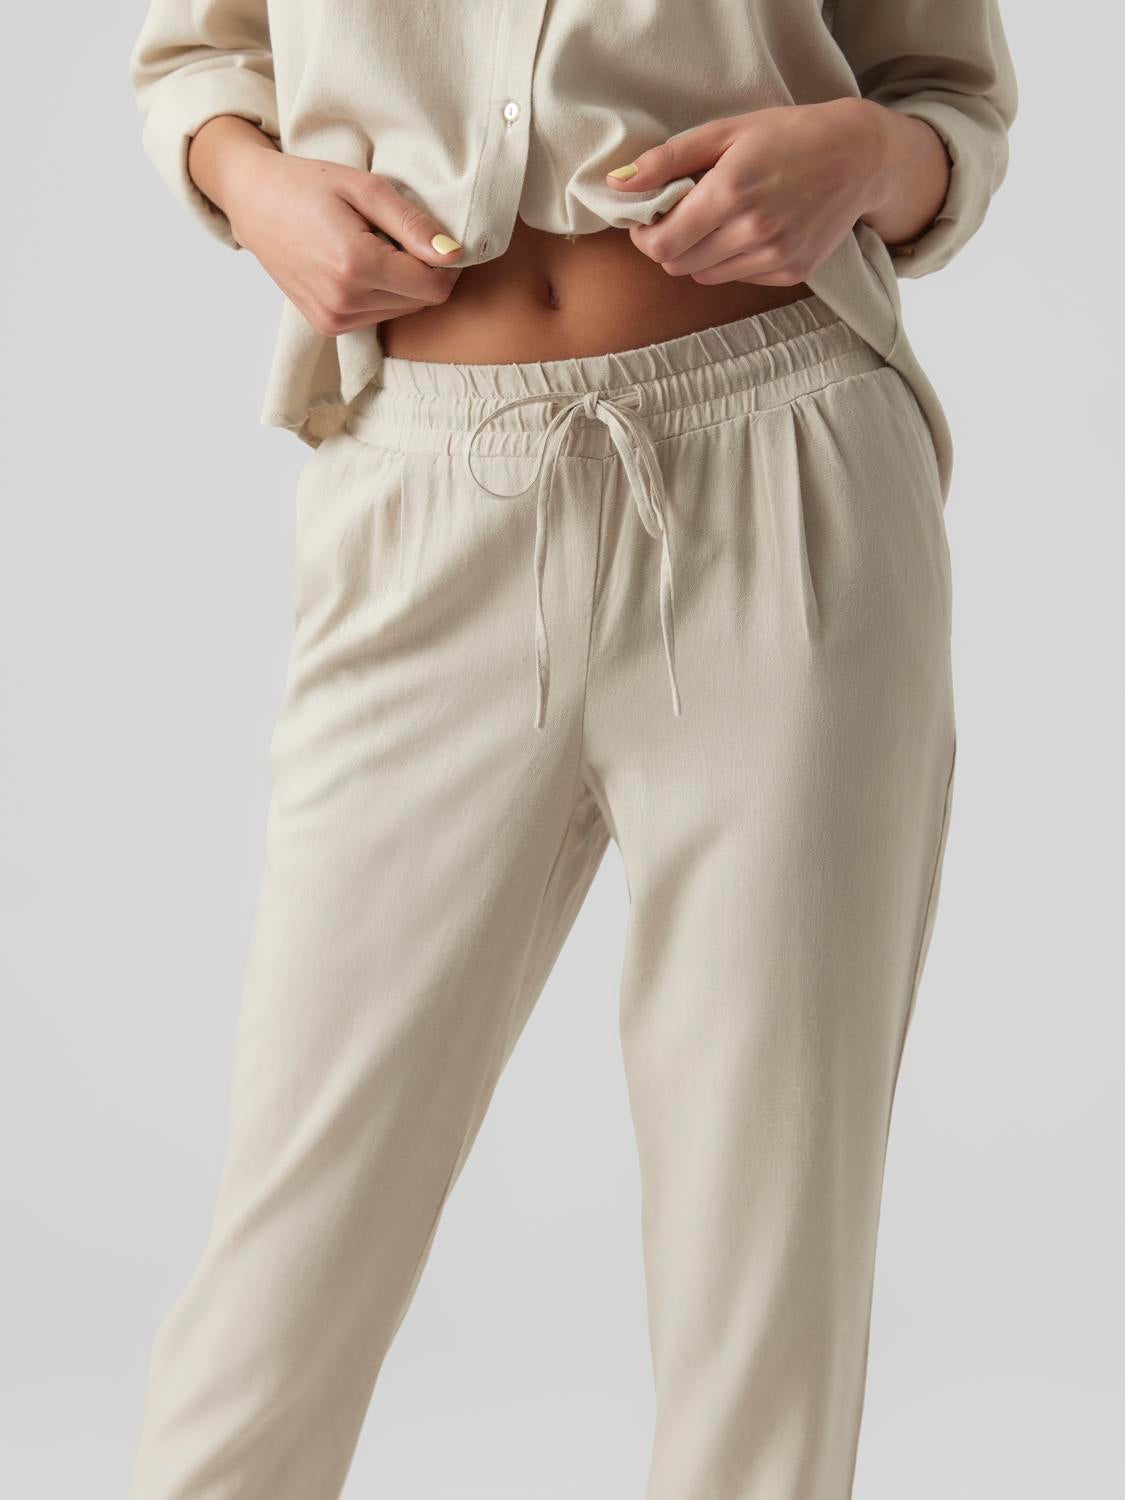 Vero Moda twill wide leg tailored pants in gray - part of a set | ASOS